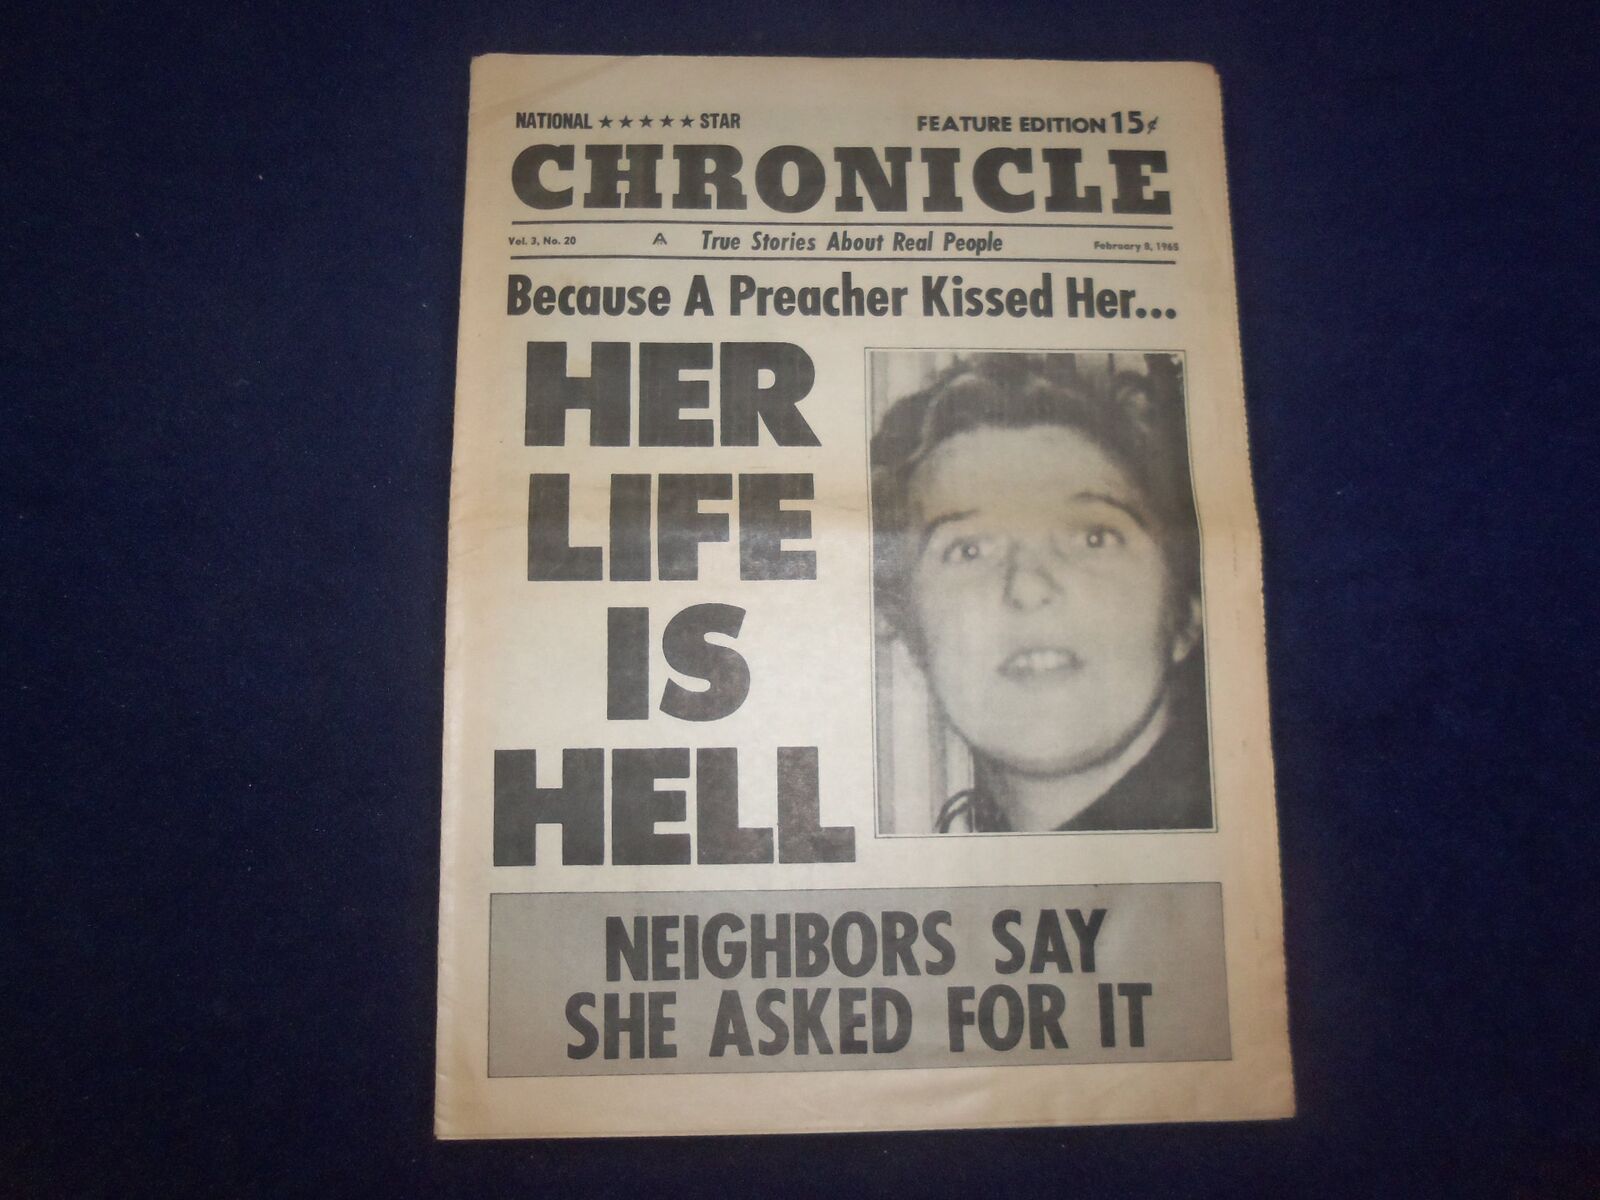 1965 FEBRUARY 8 NATIONAL STAR CHRONICLE NEWSPAPER - HER LIFE IS HELL - NP 6893